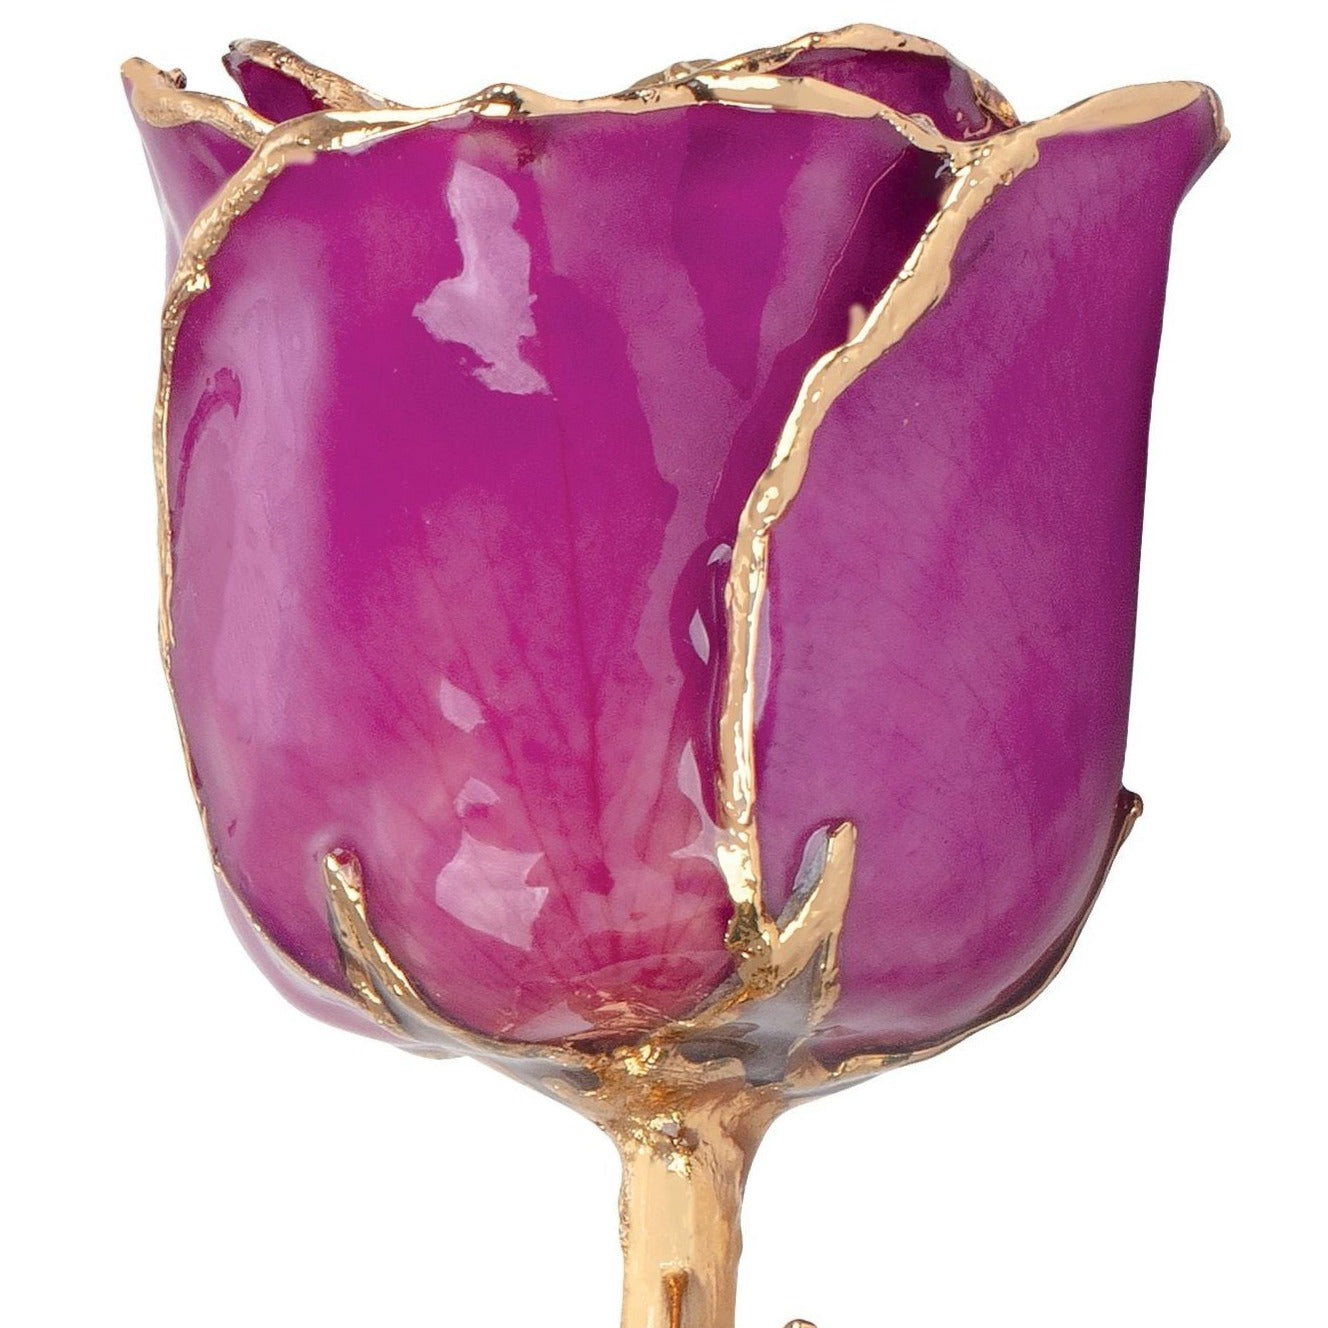 Preserved Amethyst Colored Rose with 24K Gold Trim for Luxury Home Decor